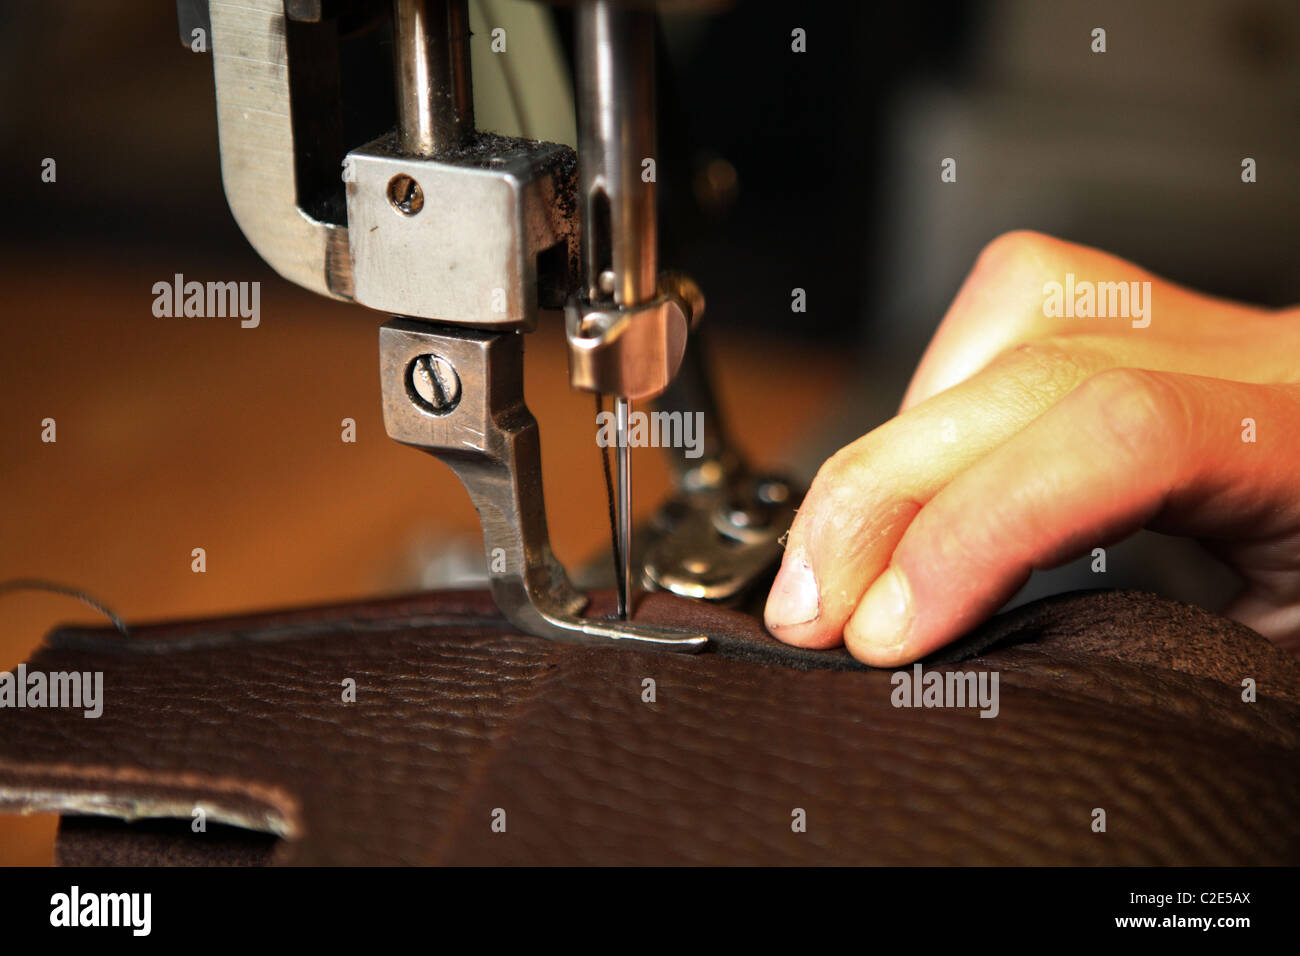 Sewing a seam on a piece of leather on a sewing machine Stock Photo